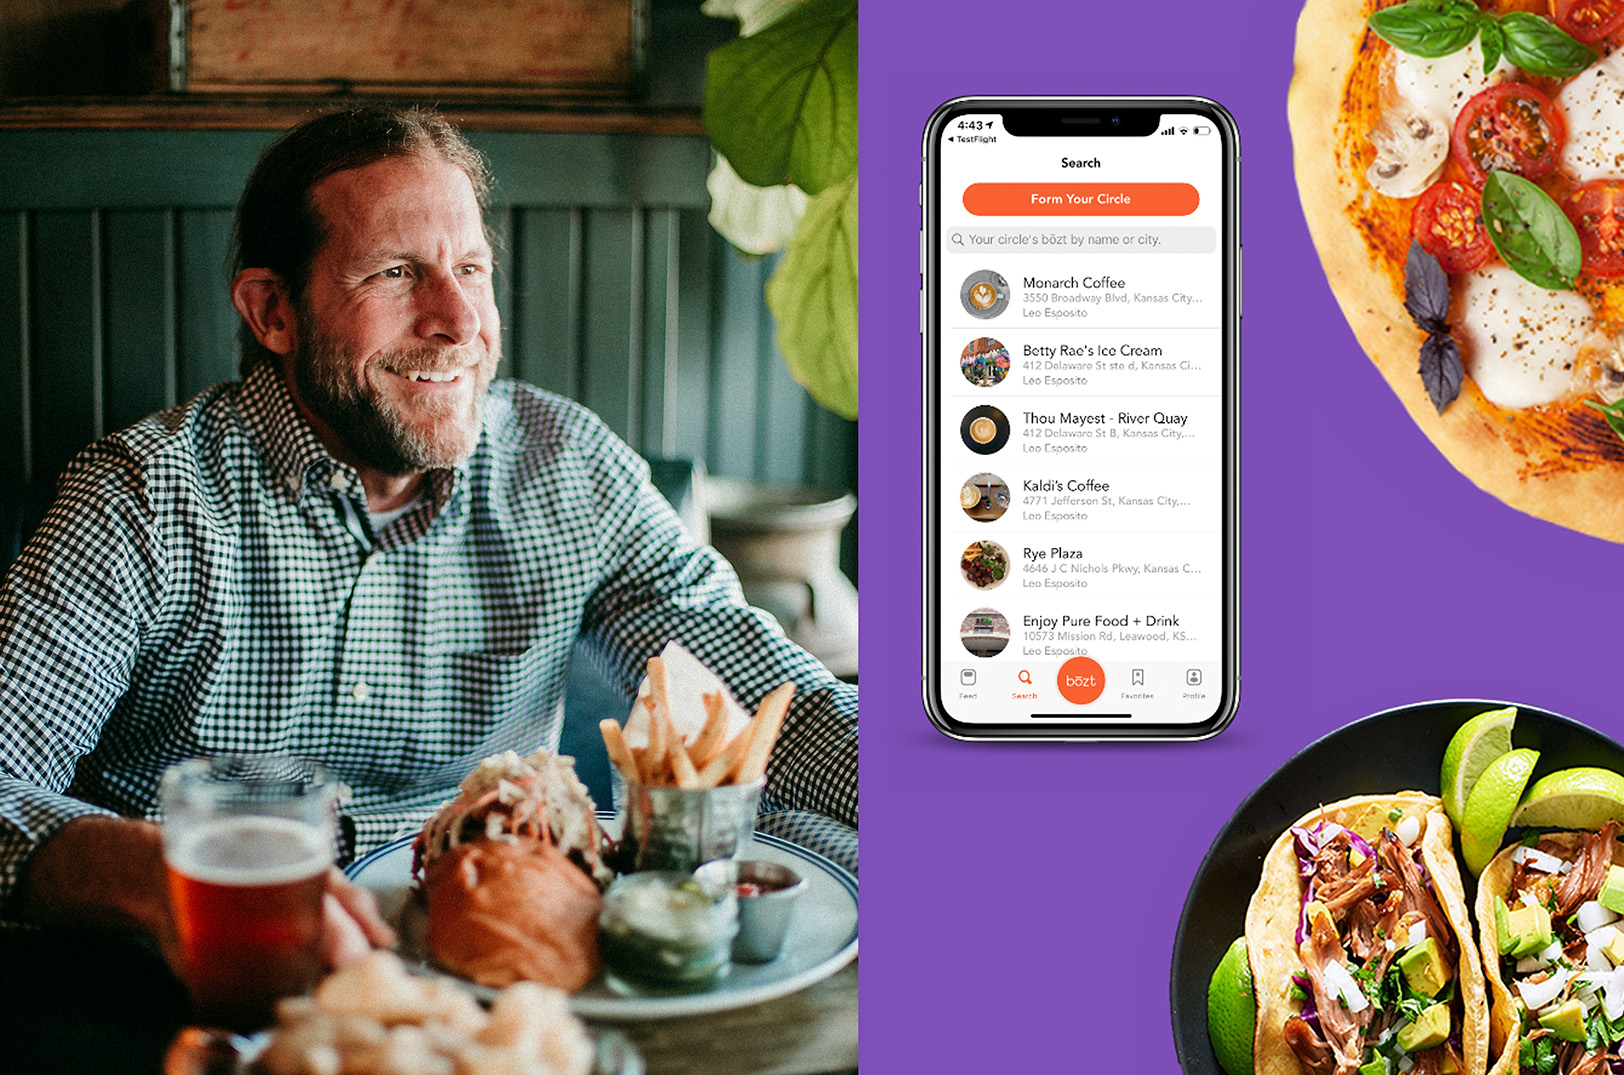 No ratings, no negative reviews: Restaurant app guides diners through crowd-sourced trust